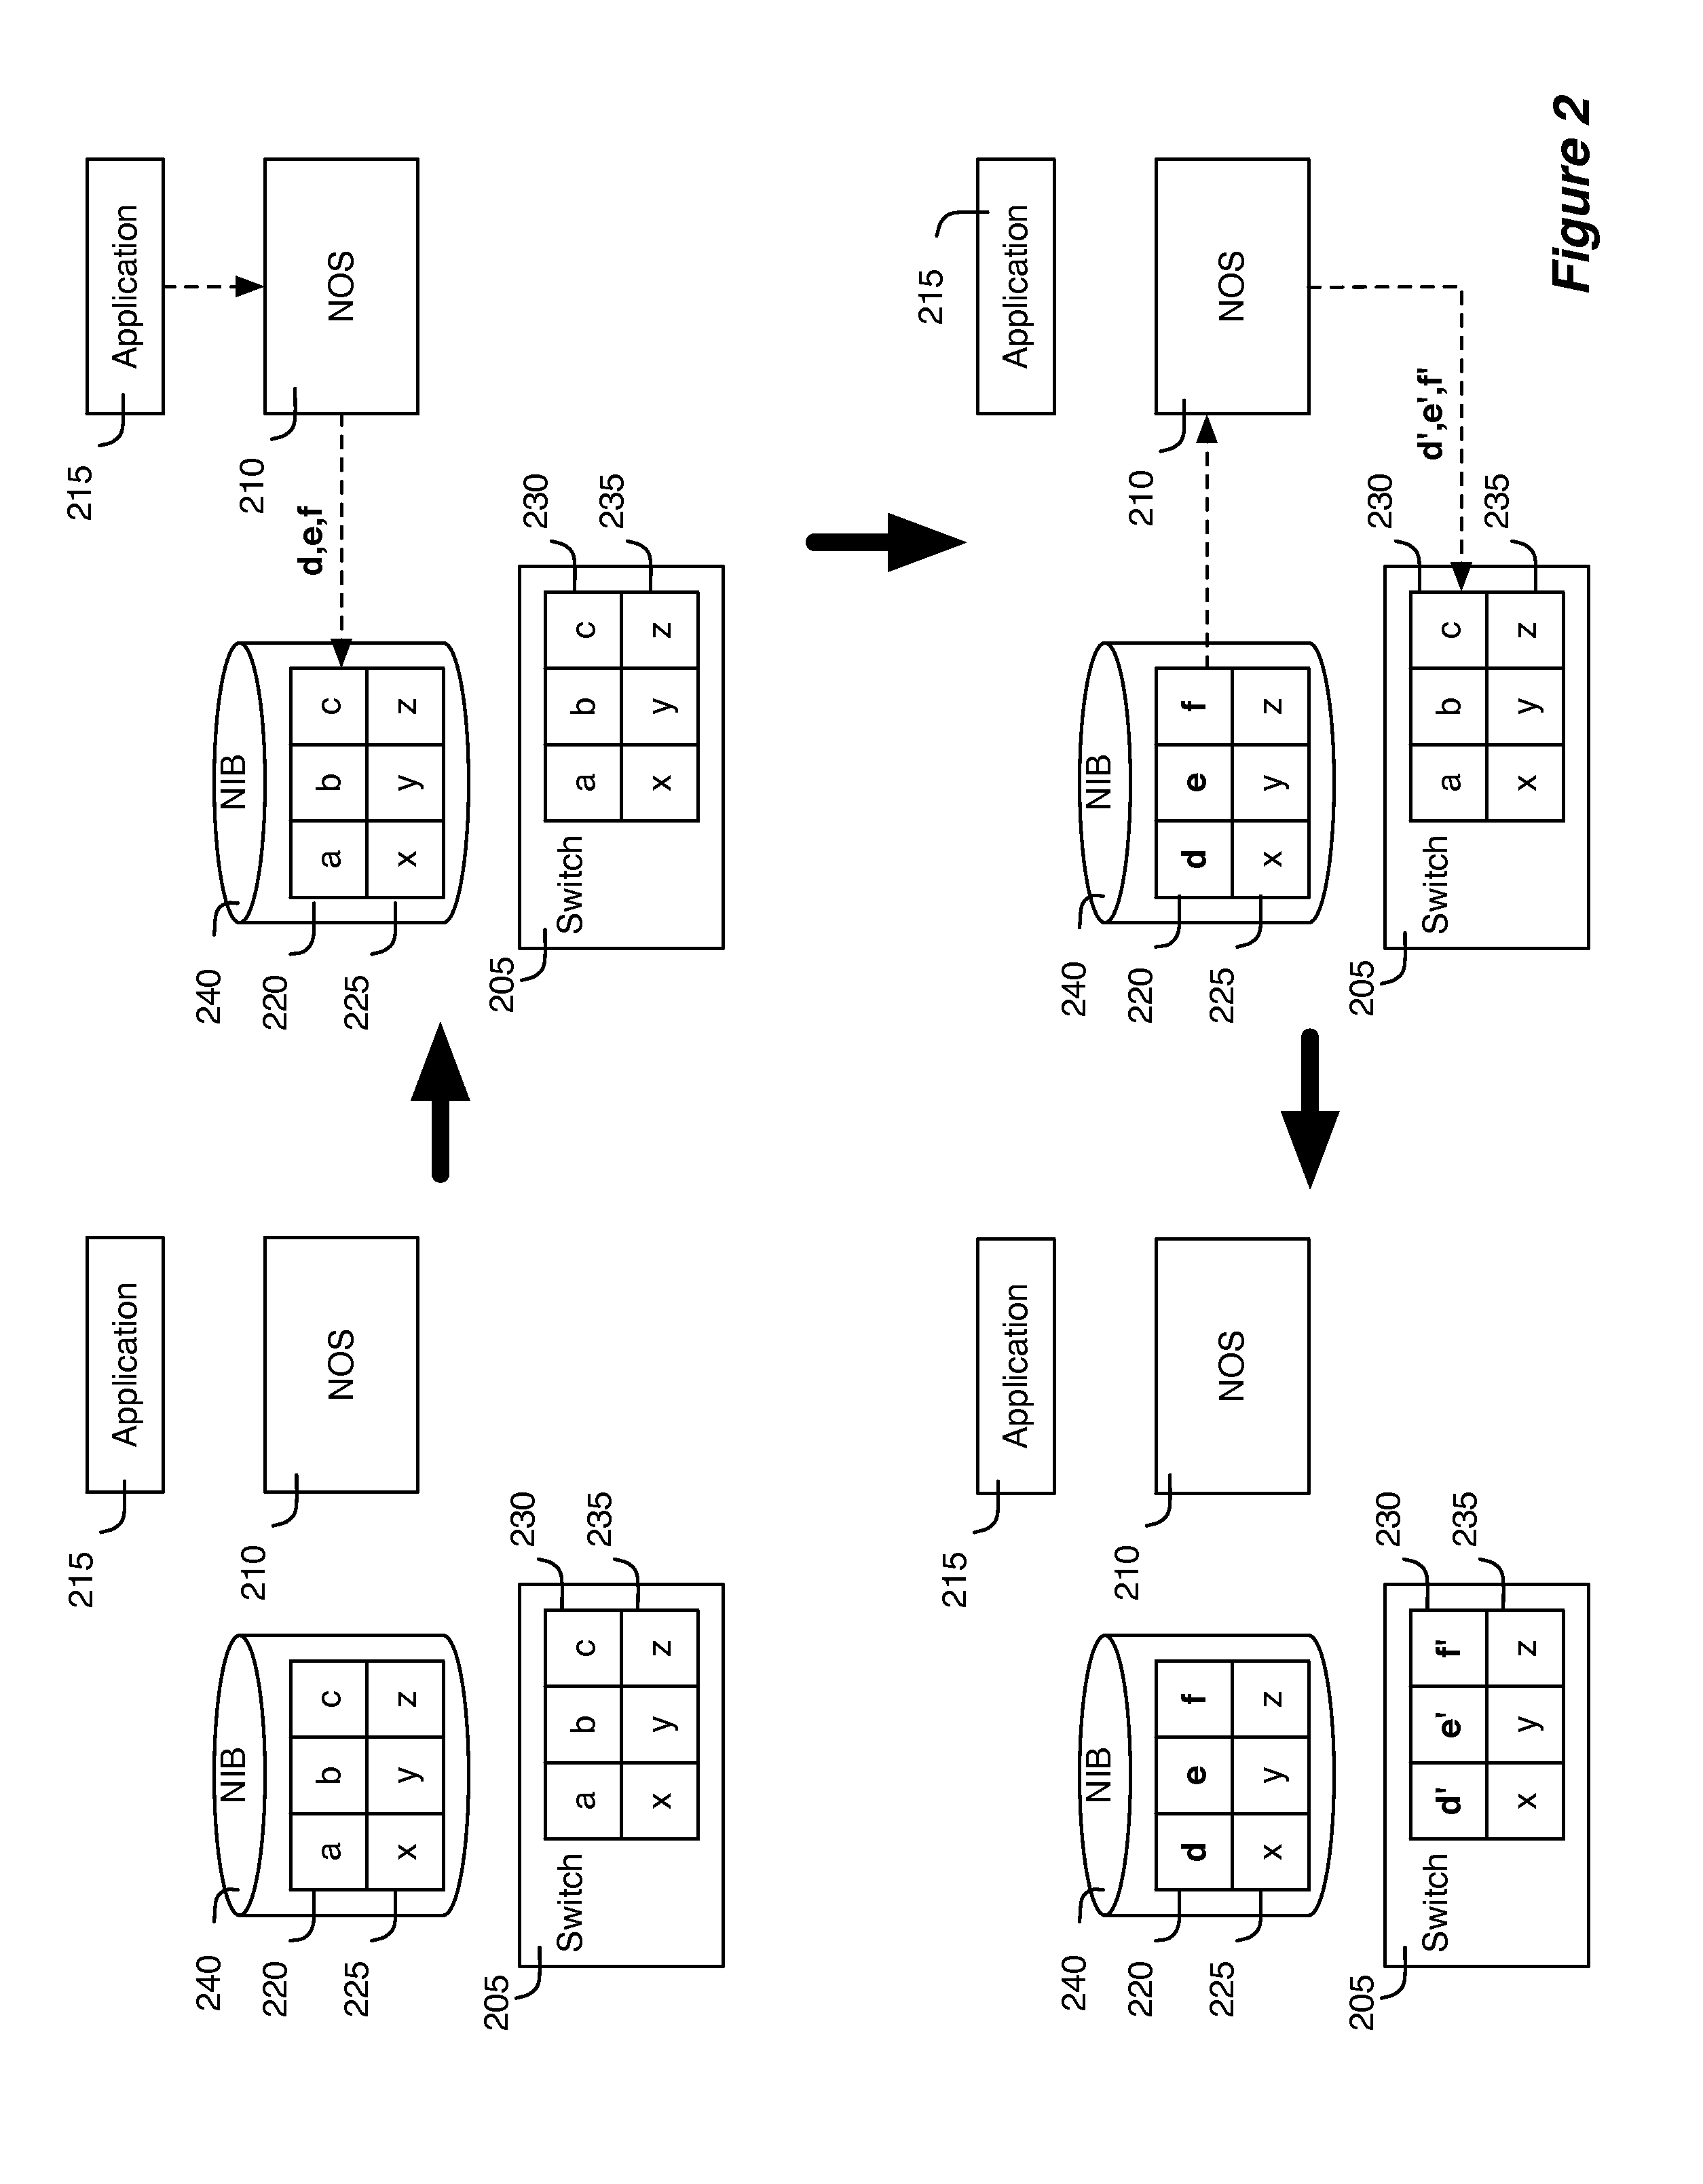 Network control apparatus and method